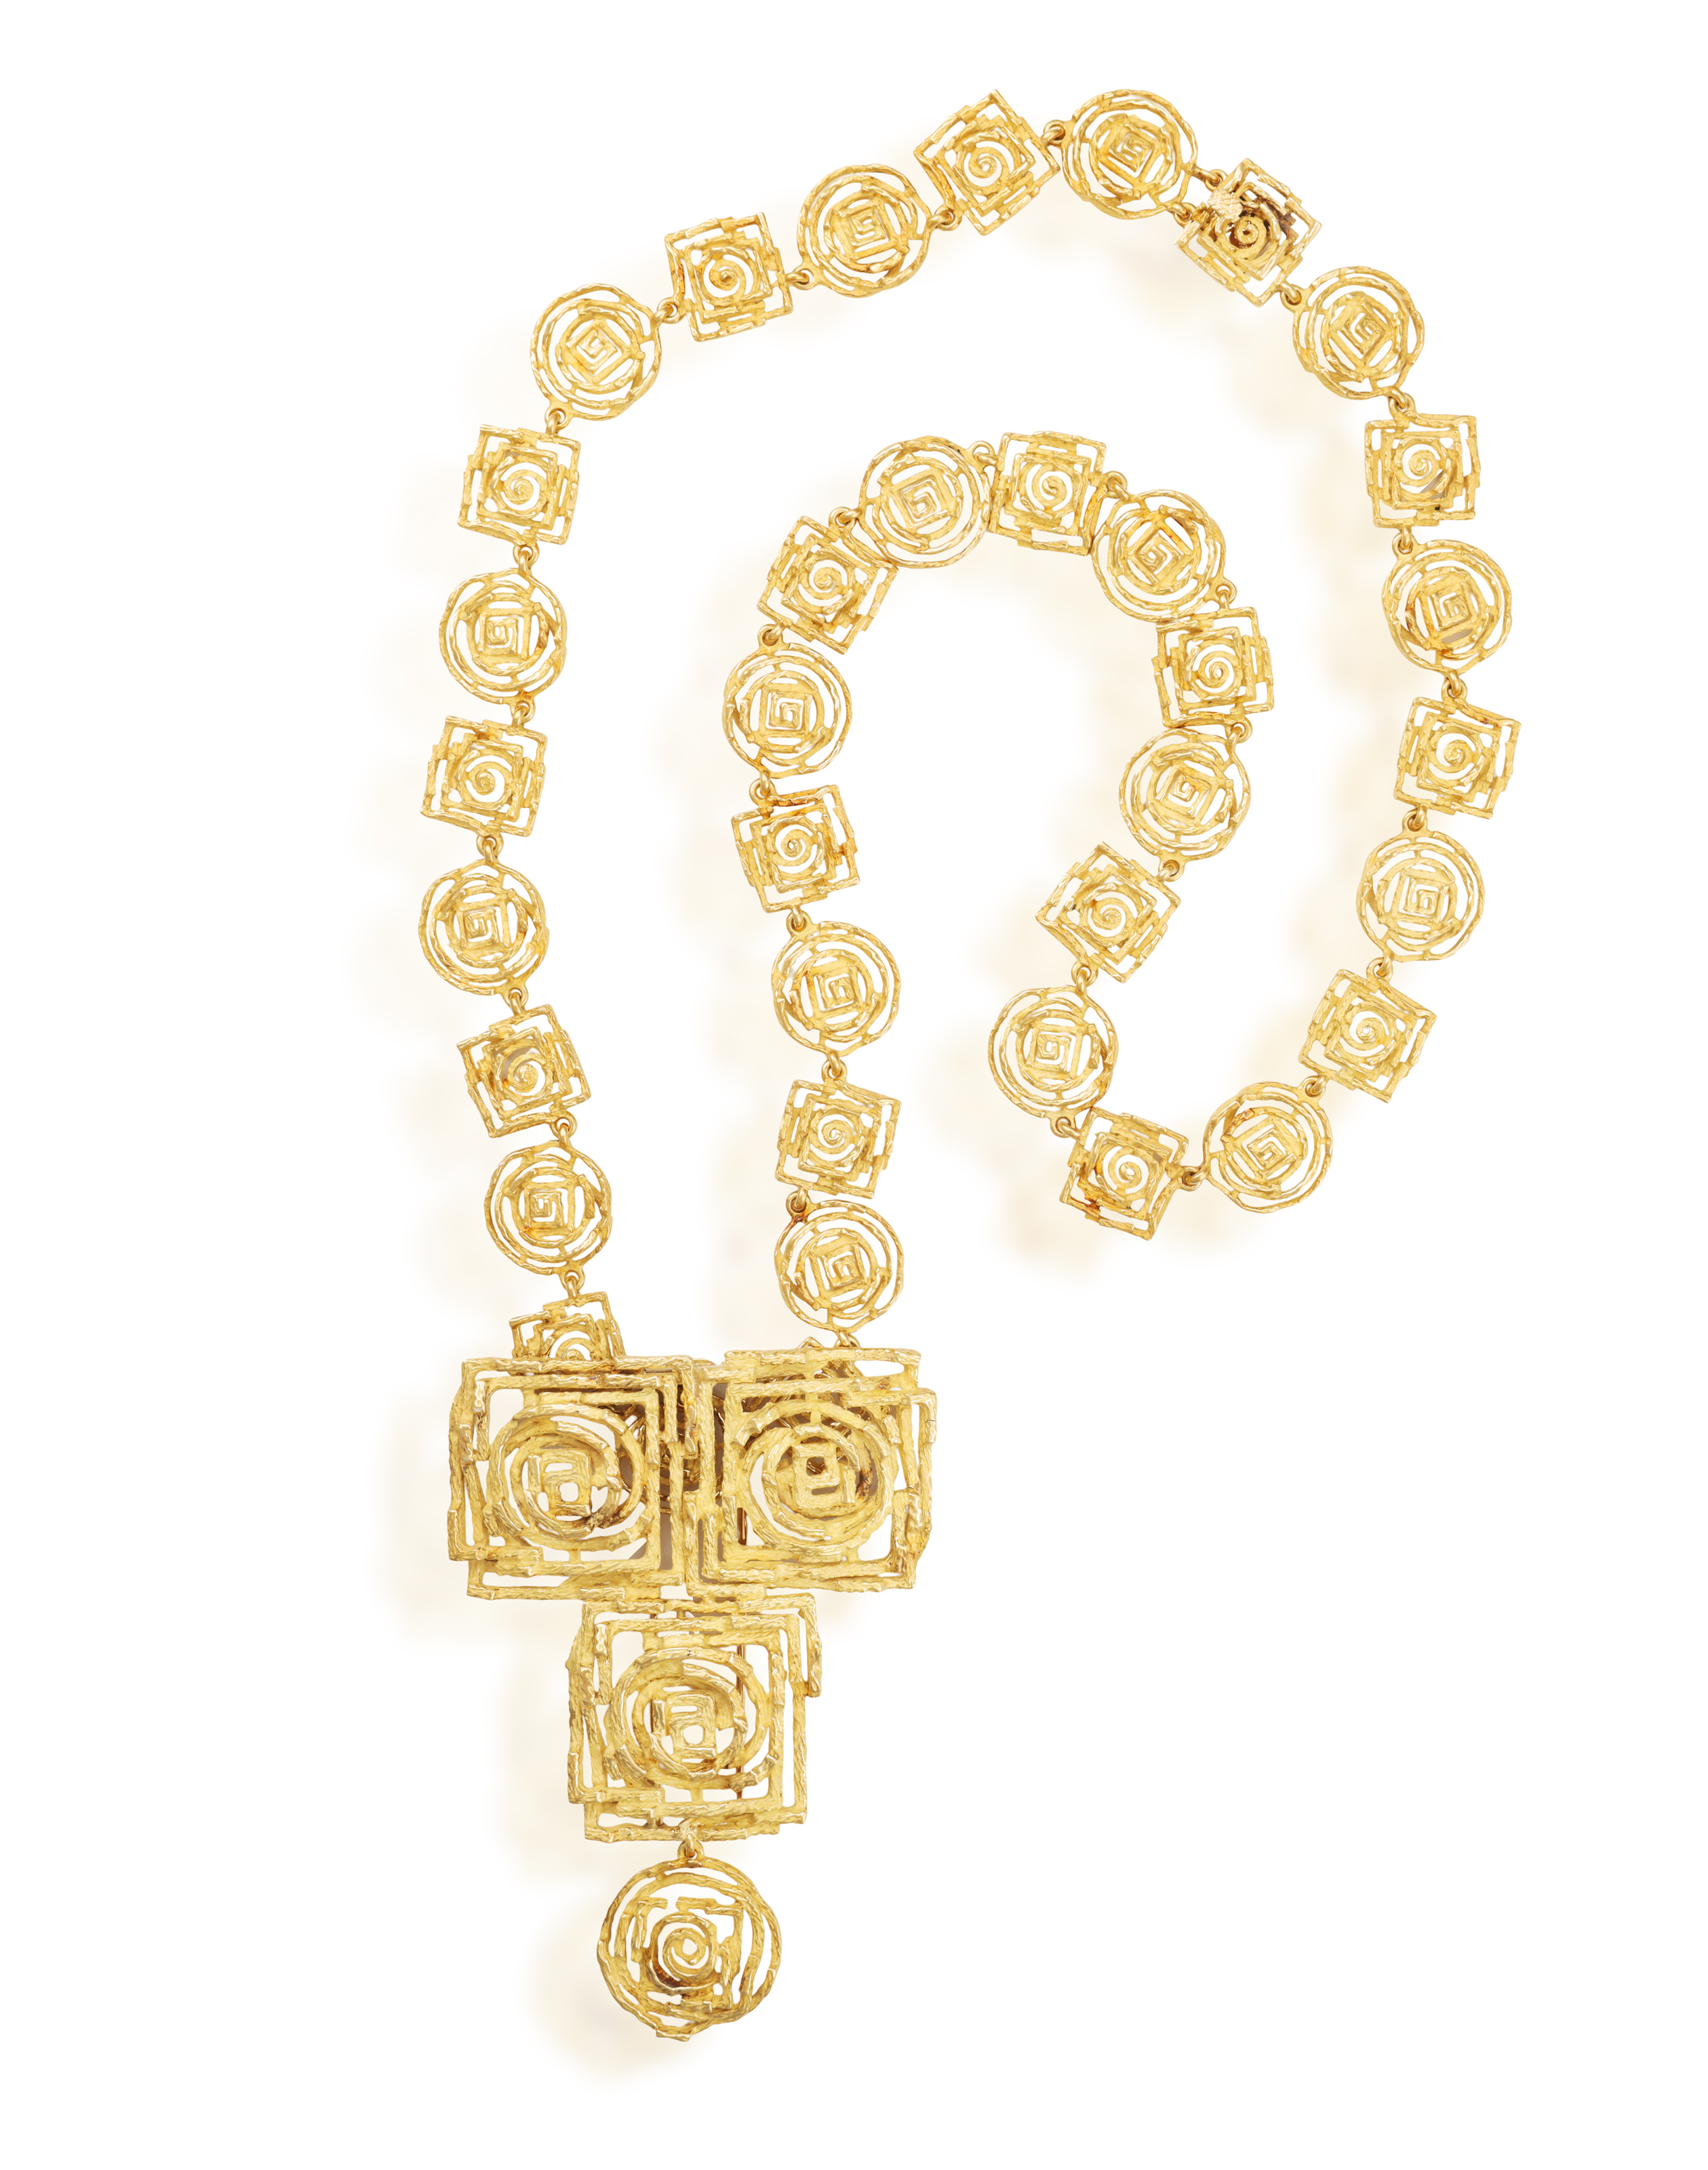 AN 18K GOLD NECKLACE, BRACELET, BROOCH AND EARCLIPS EN SUITE, BY CHAUMET, CIRCA 1970 Each composed - Image 2 of 14